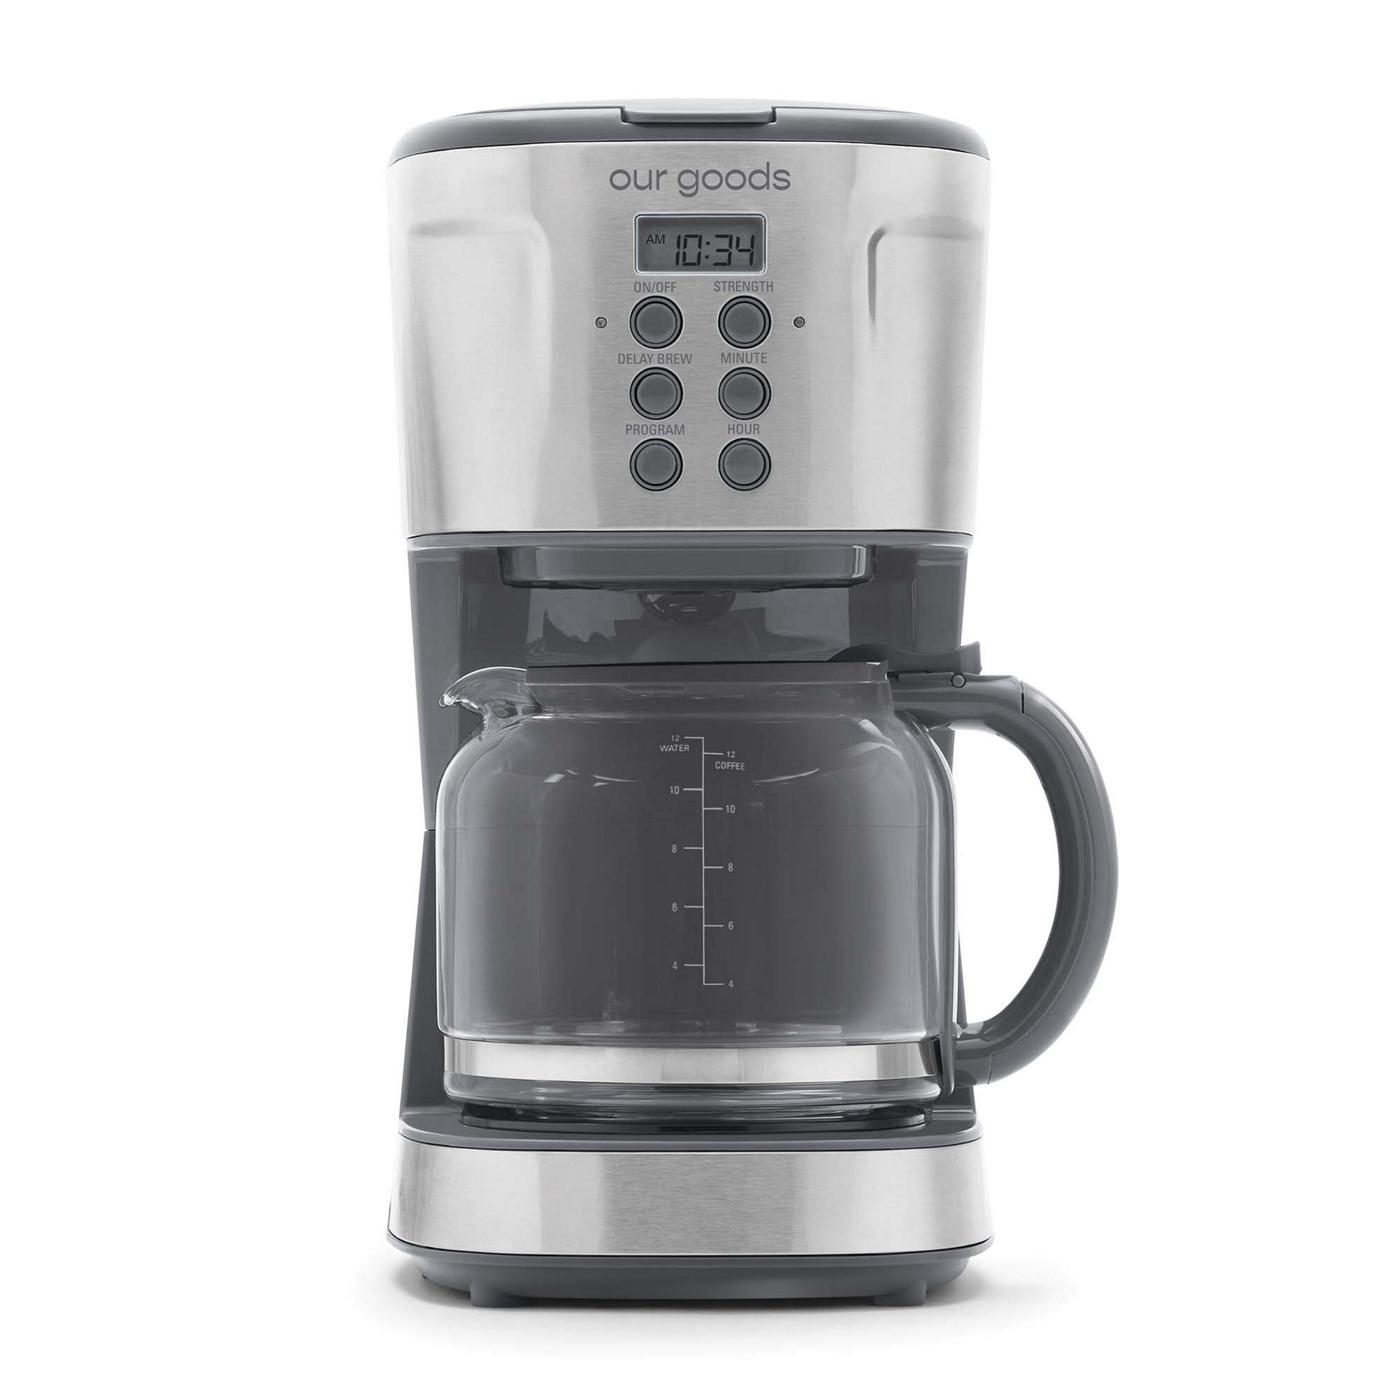 our goods Programmable Coffee Maker - Pebble Gray; image 1 of 5